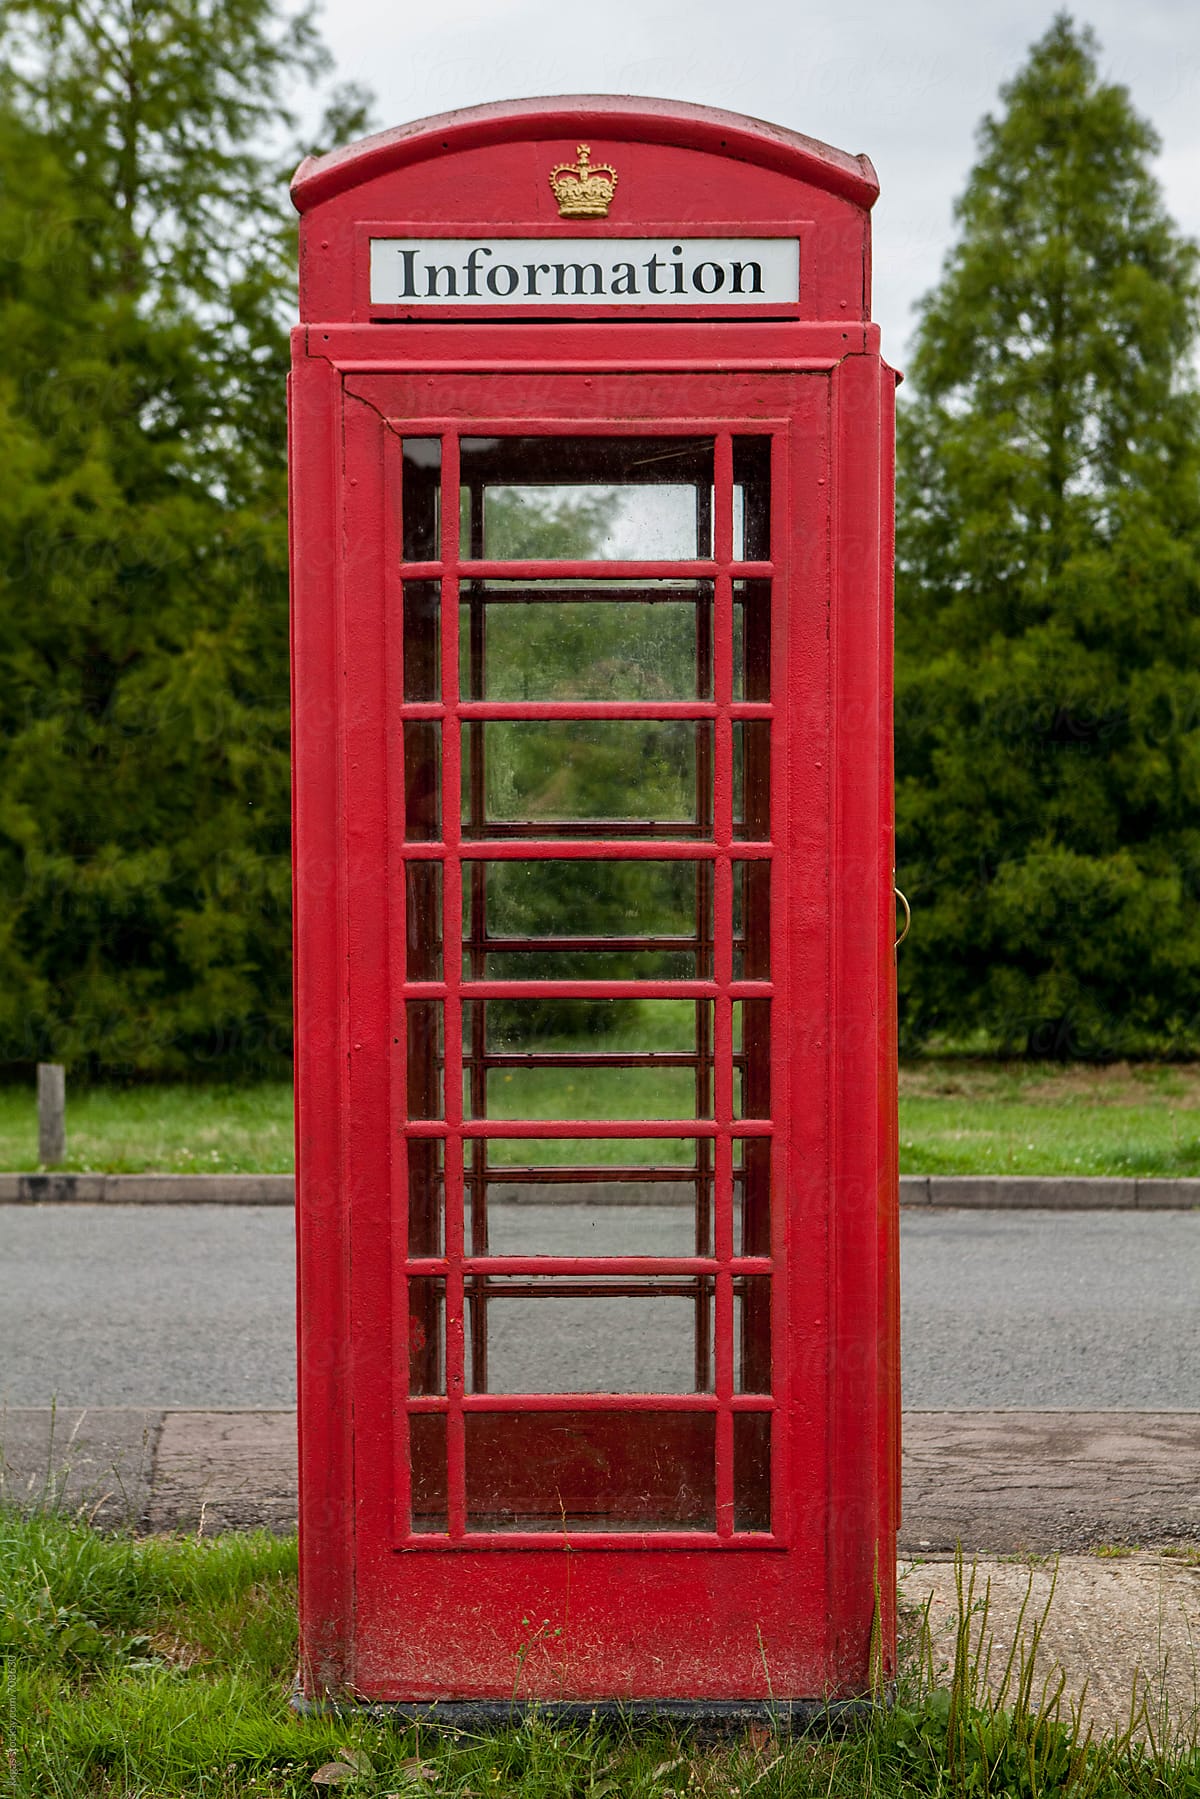 Repurposed public telephone box, now used as an information booth